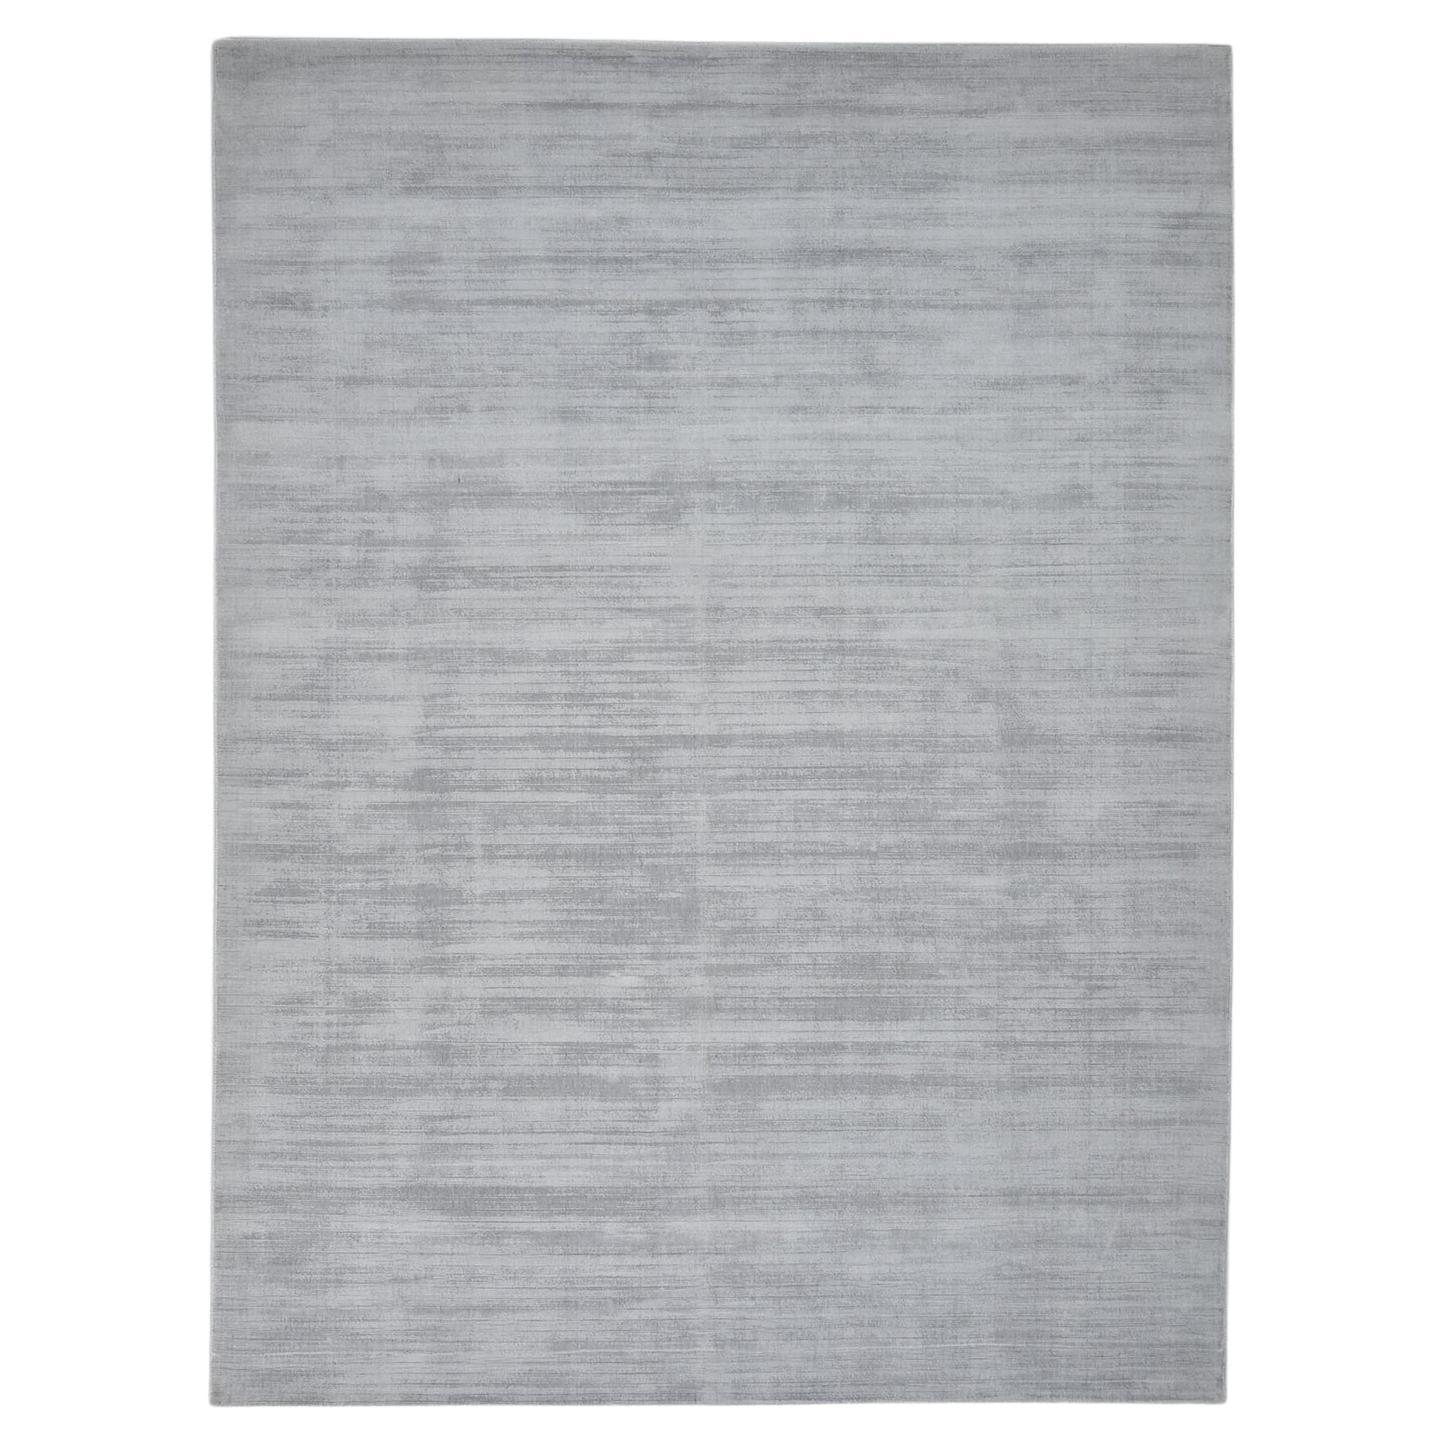 Solo Rugs Solid Modern Hand Loomed Gray 5 x 8 Area Rug im Angebot